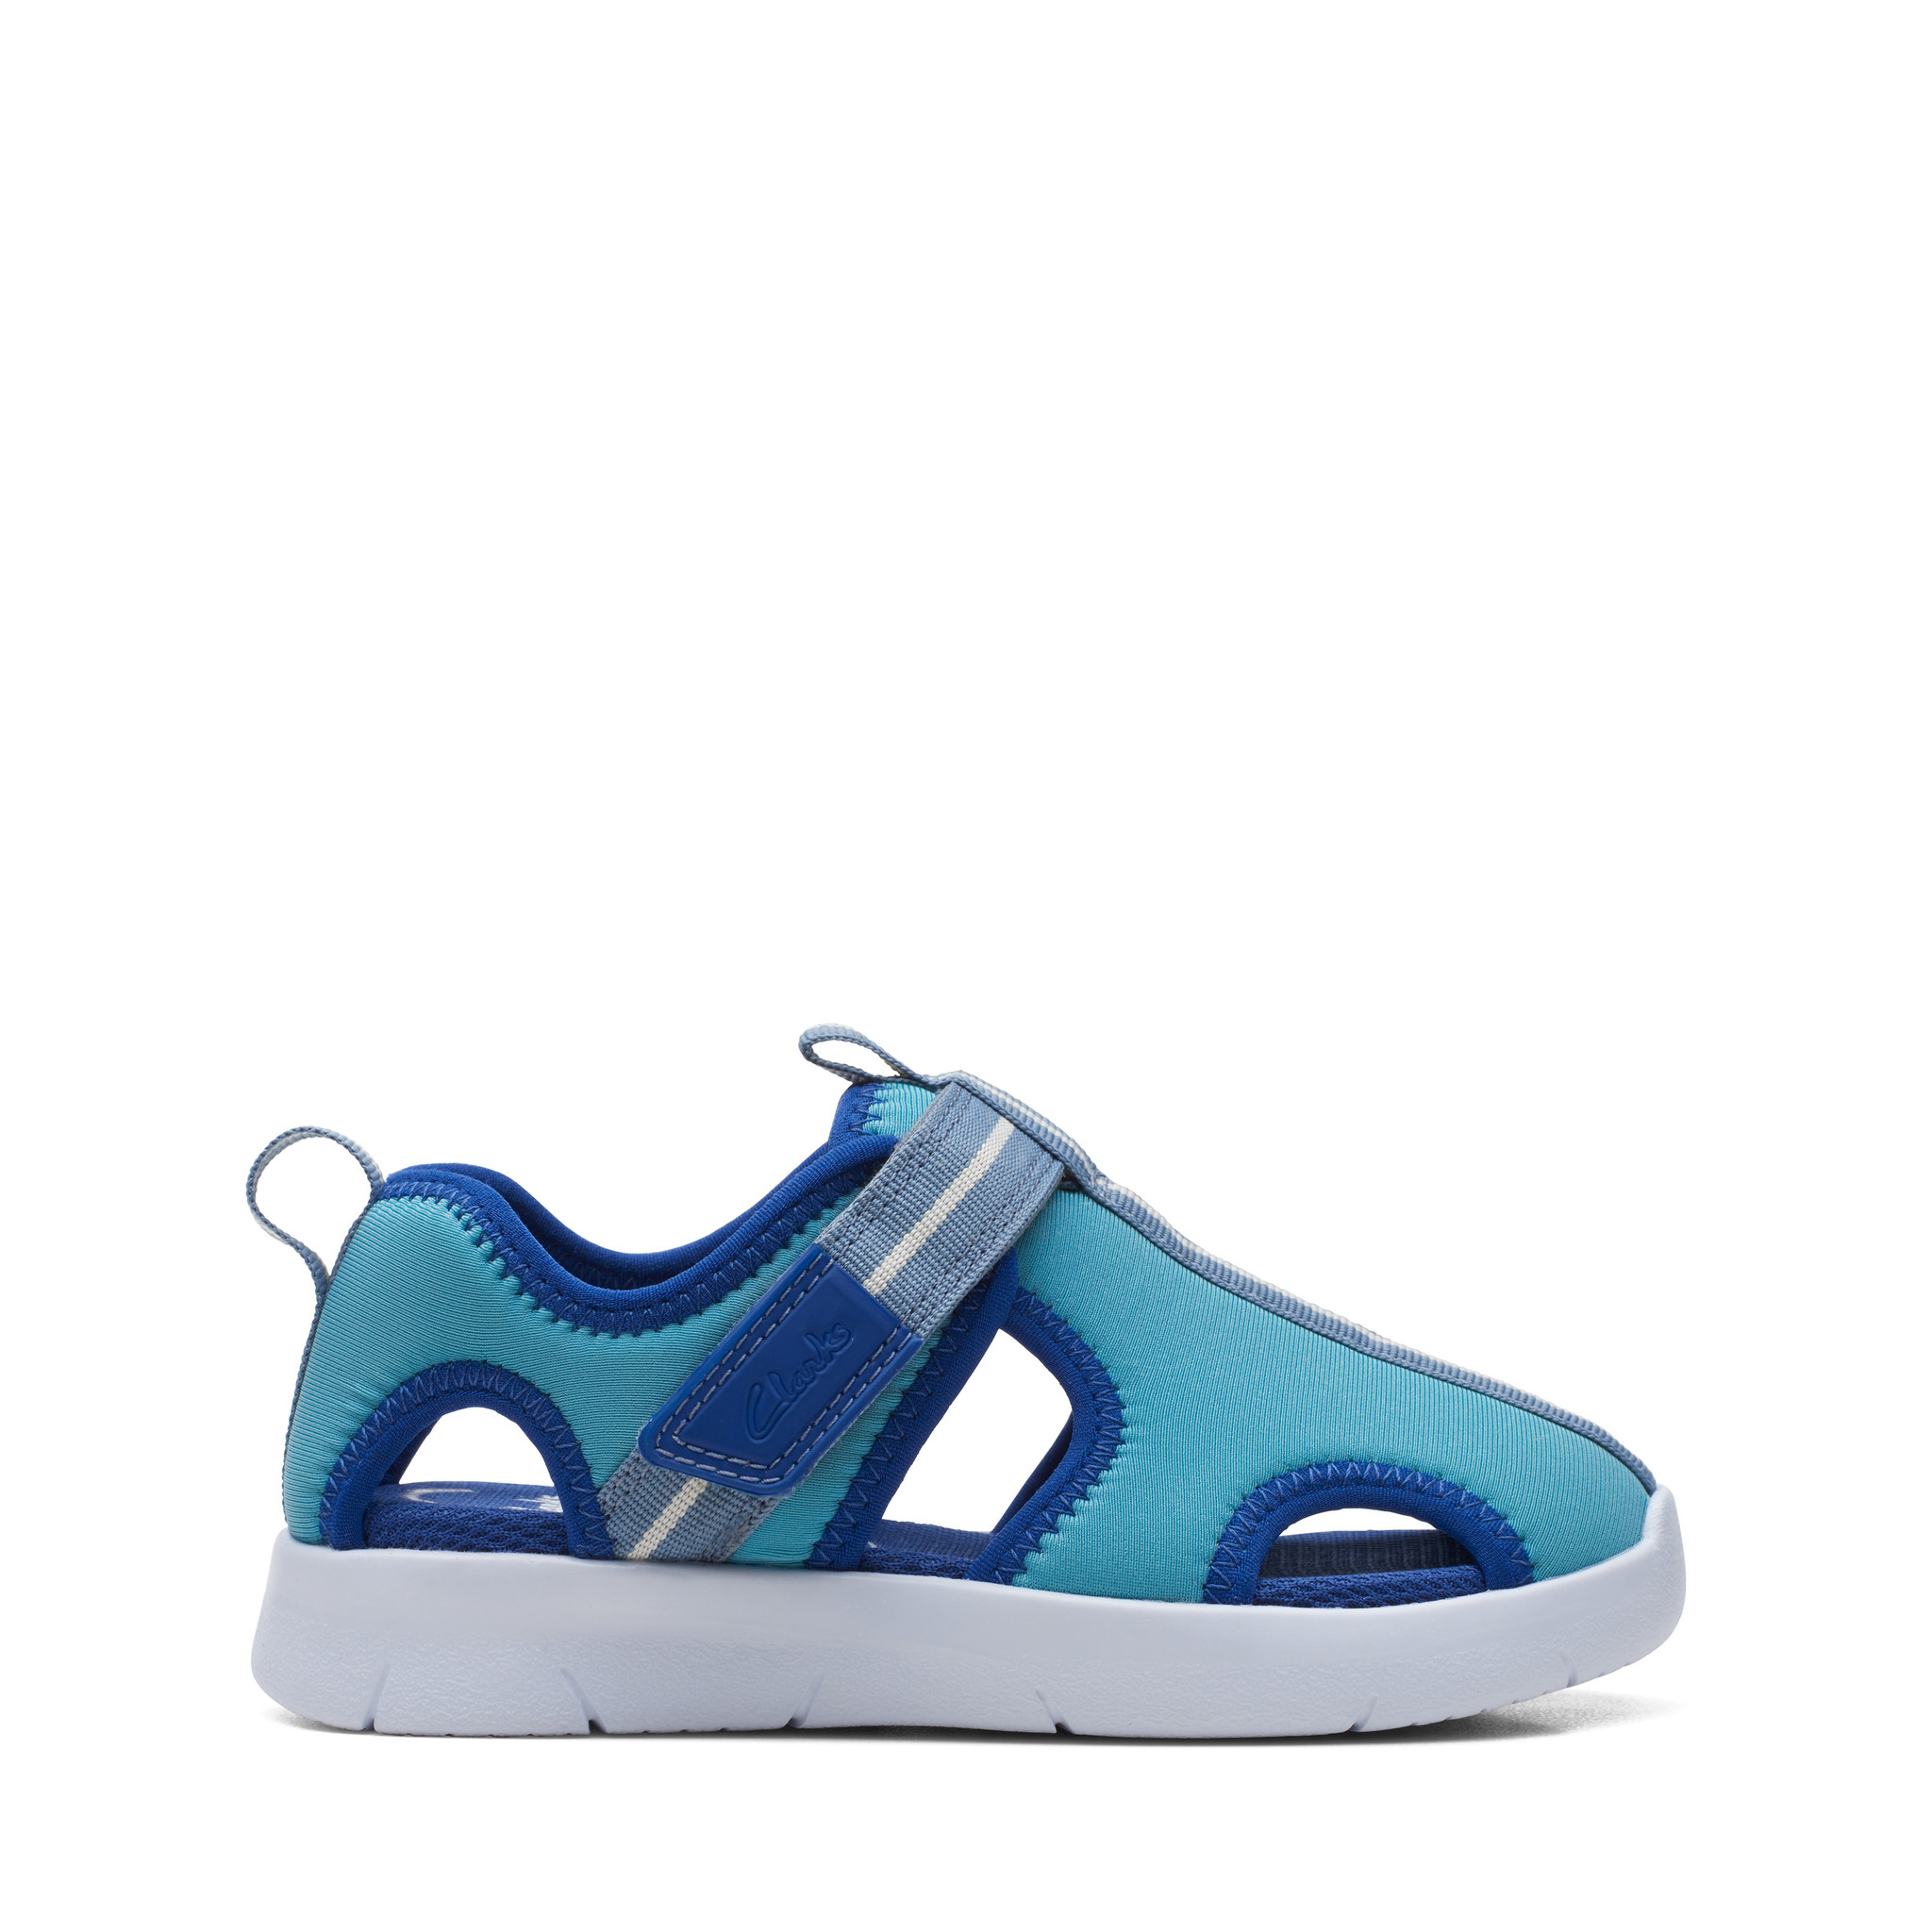 Clarks Ath Water Blue Combi Infant